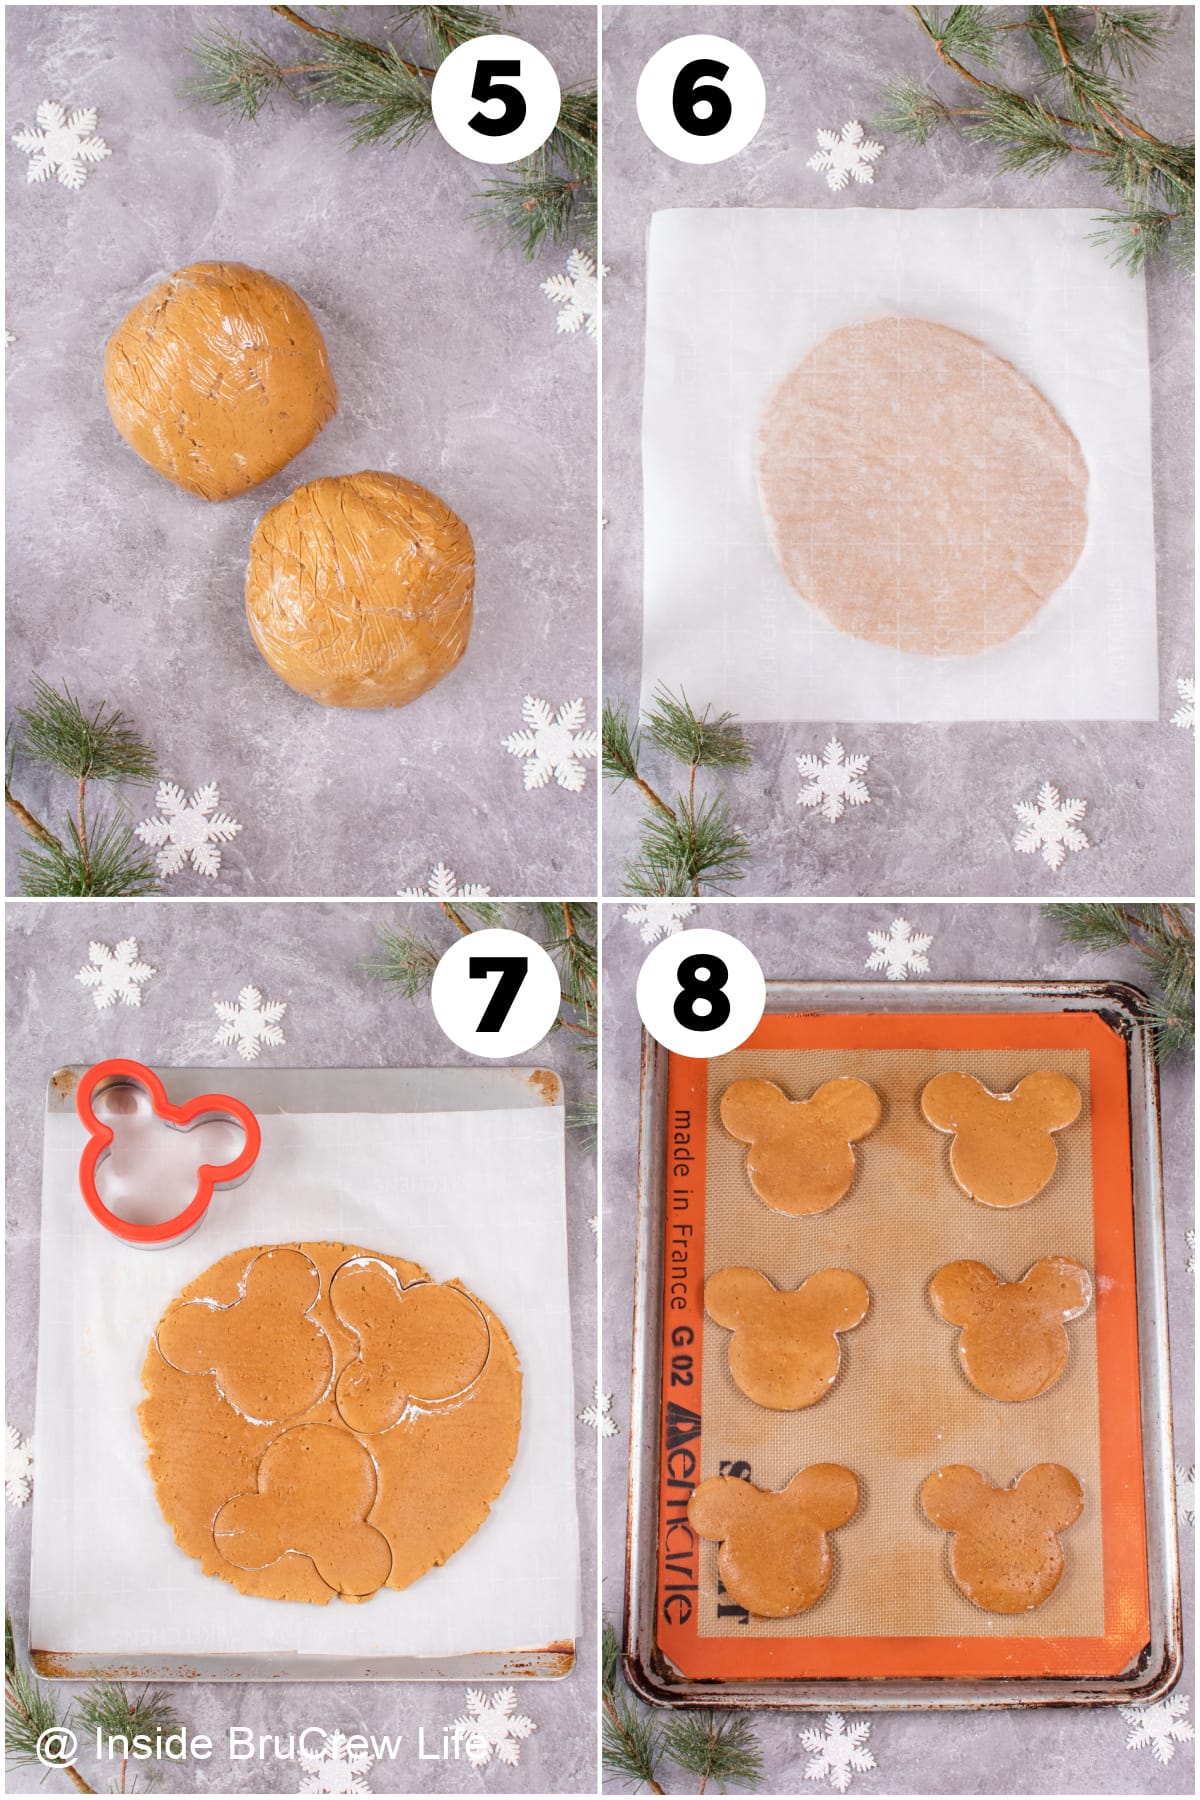 A collage of 4 pictures showing how to roll and cut gingerbread.